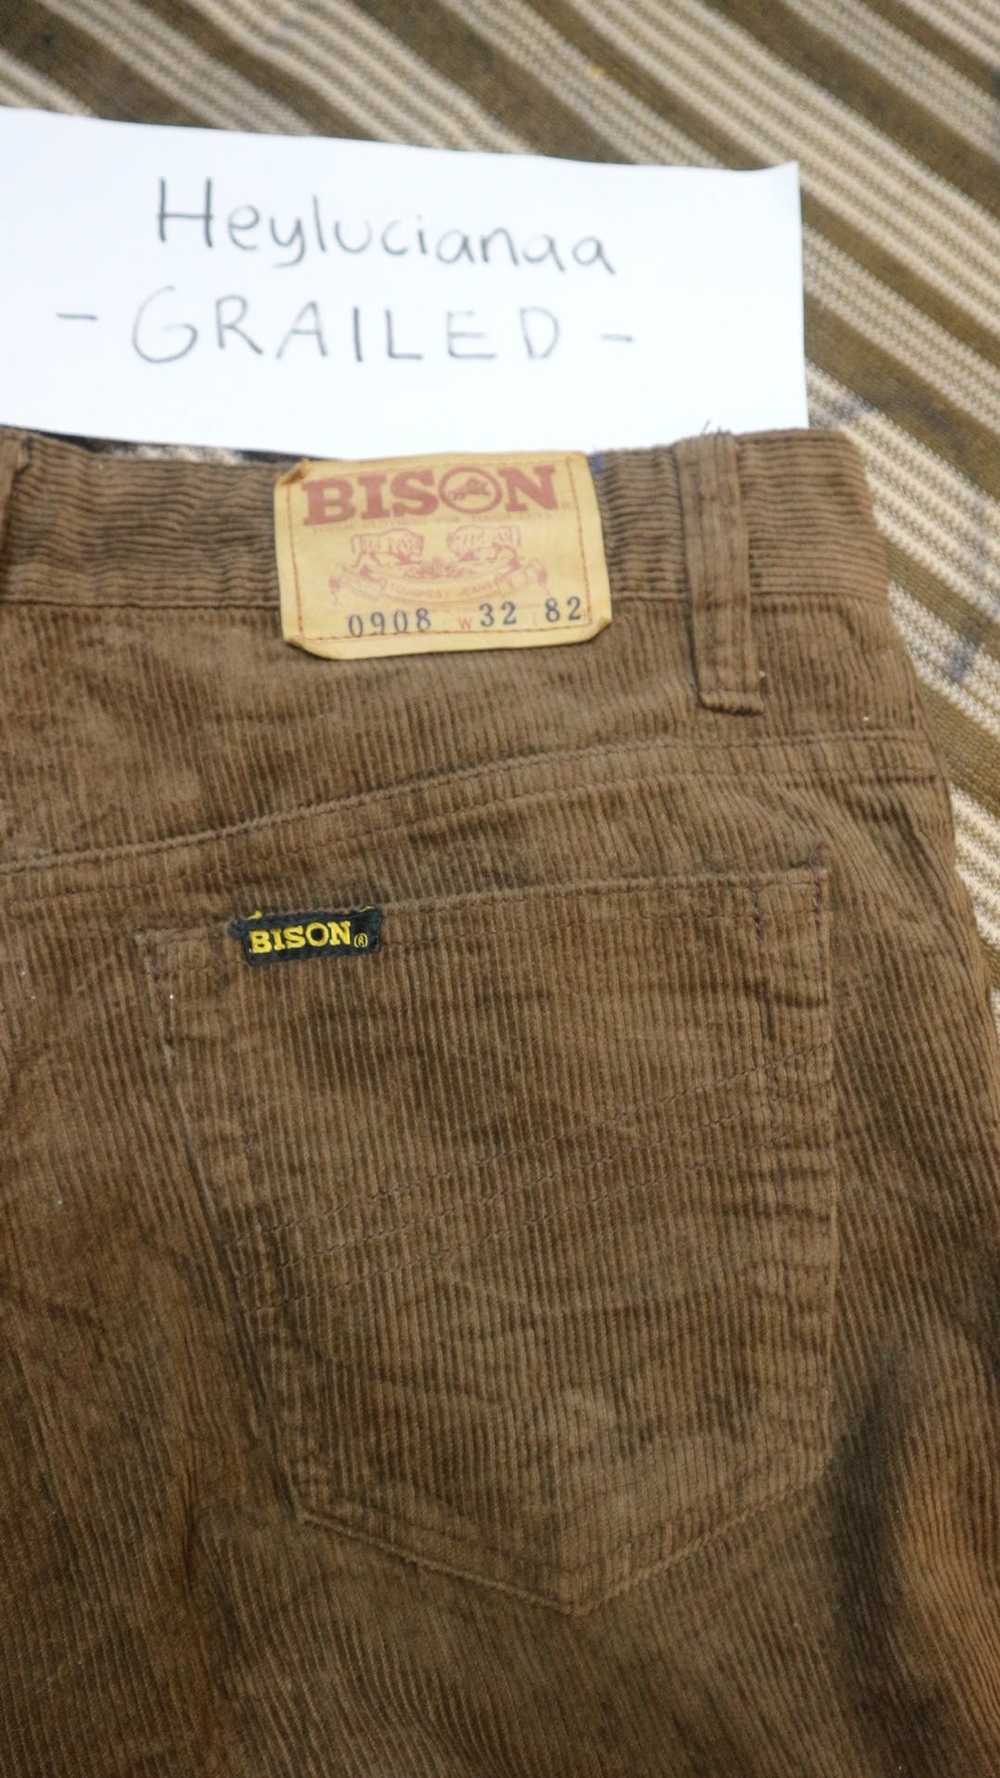 Japanese Brand Corduroy Pant by Bison - image 8